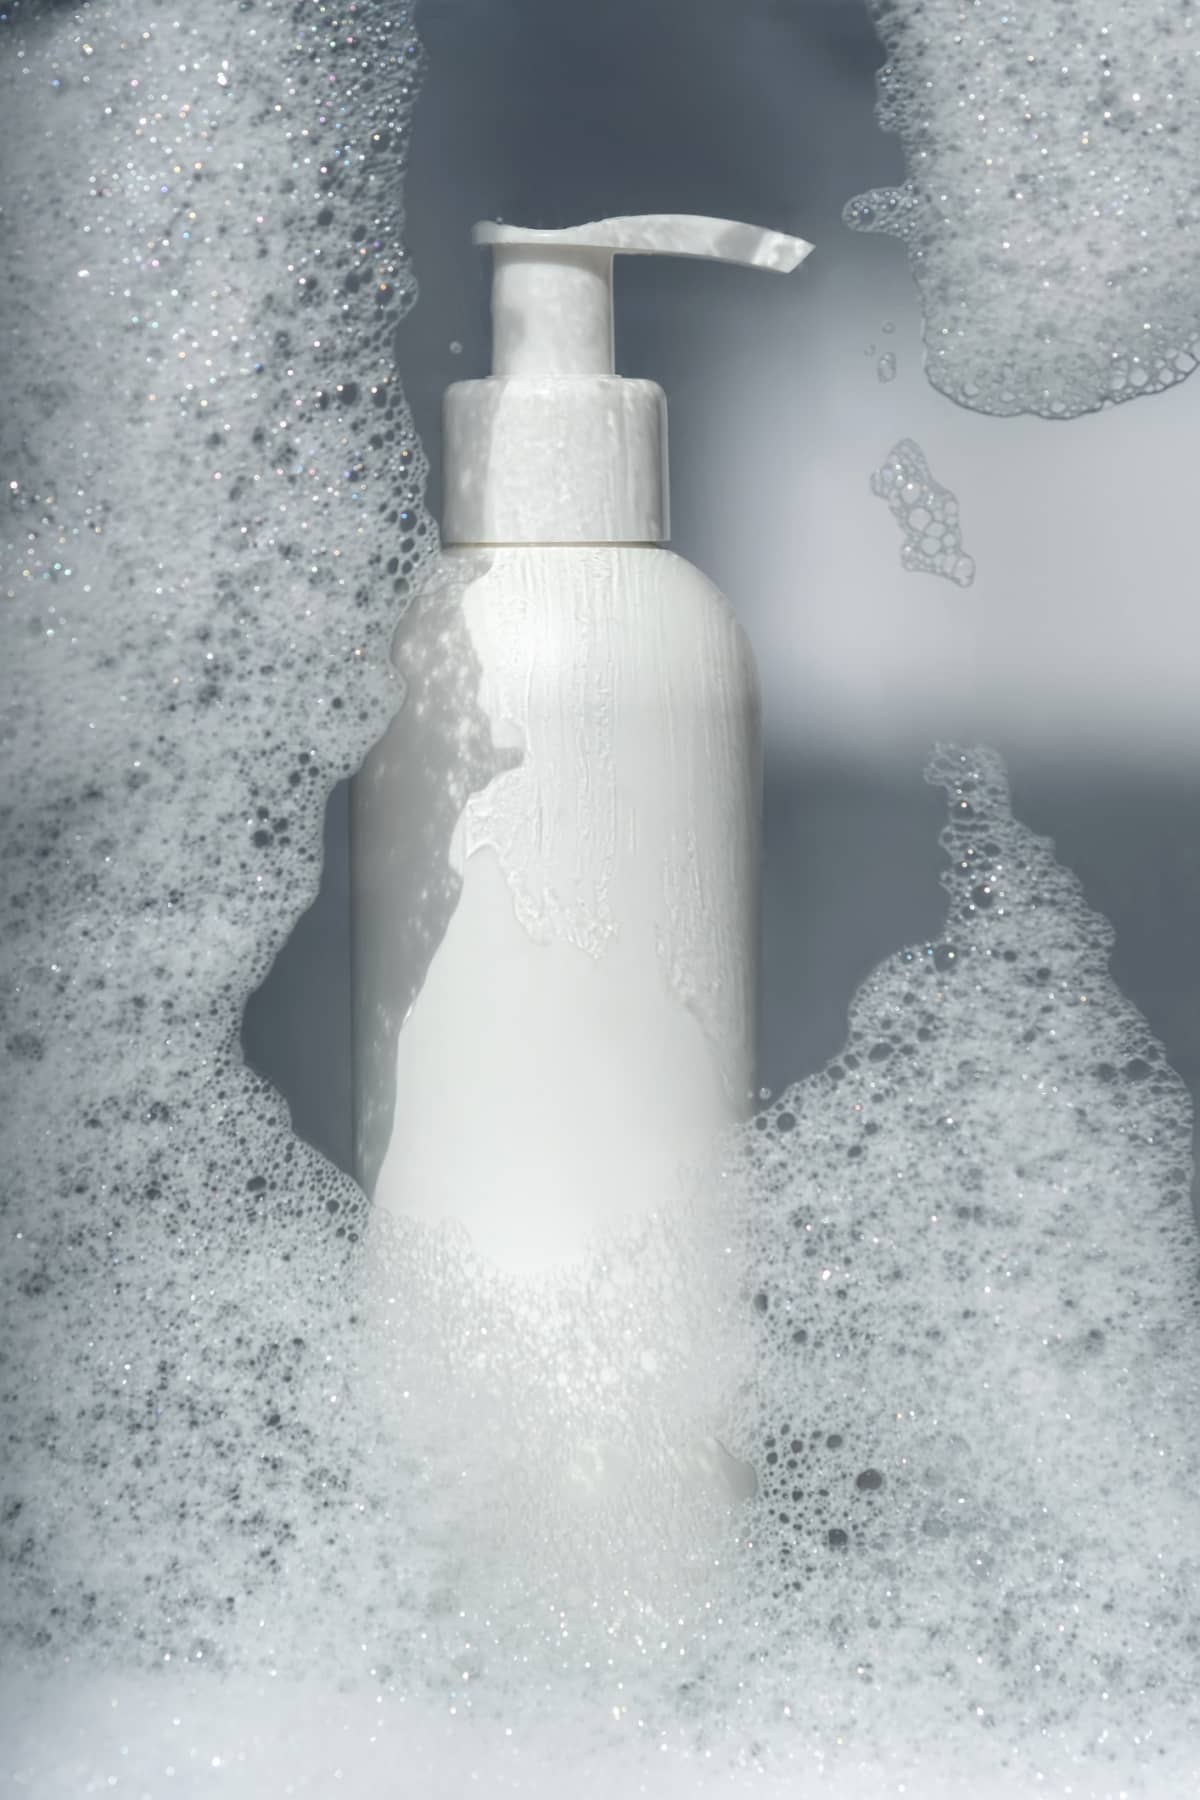 A bottle of gel or shampoo on a background of white foam. A perfect demonstration of the product and texture.